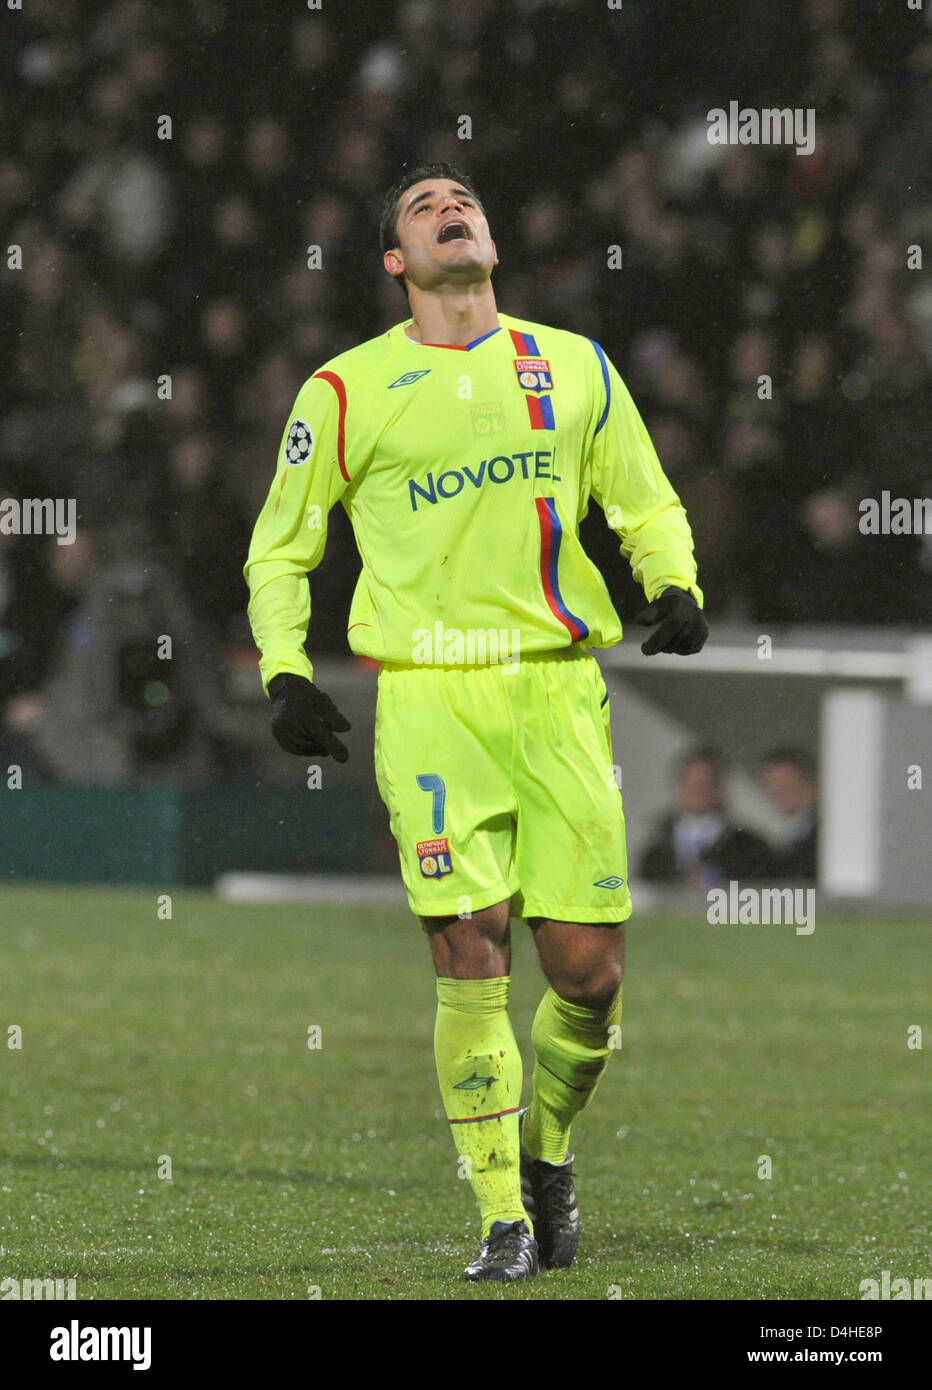 Ederson of Olympique Lyon gestures during the Champions League Group F match against FC Bayern Munich at Stade de Gerland in Lyon, France, 10 December 2008. Bayern Munich defeated Lyon 3-2 securing the first place in UEFA Champions League Group F. Photo: Andreas Gebert Stock Photo